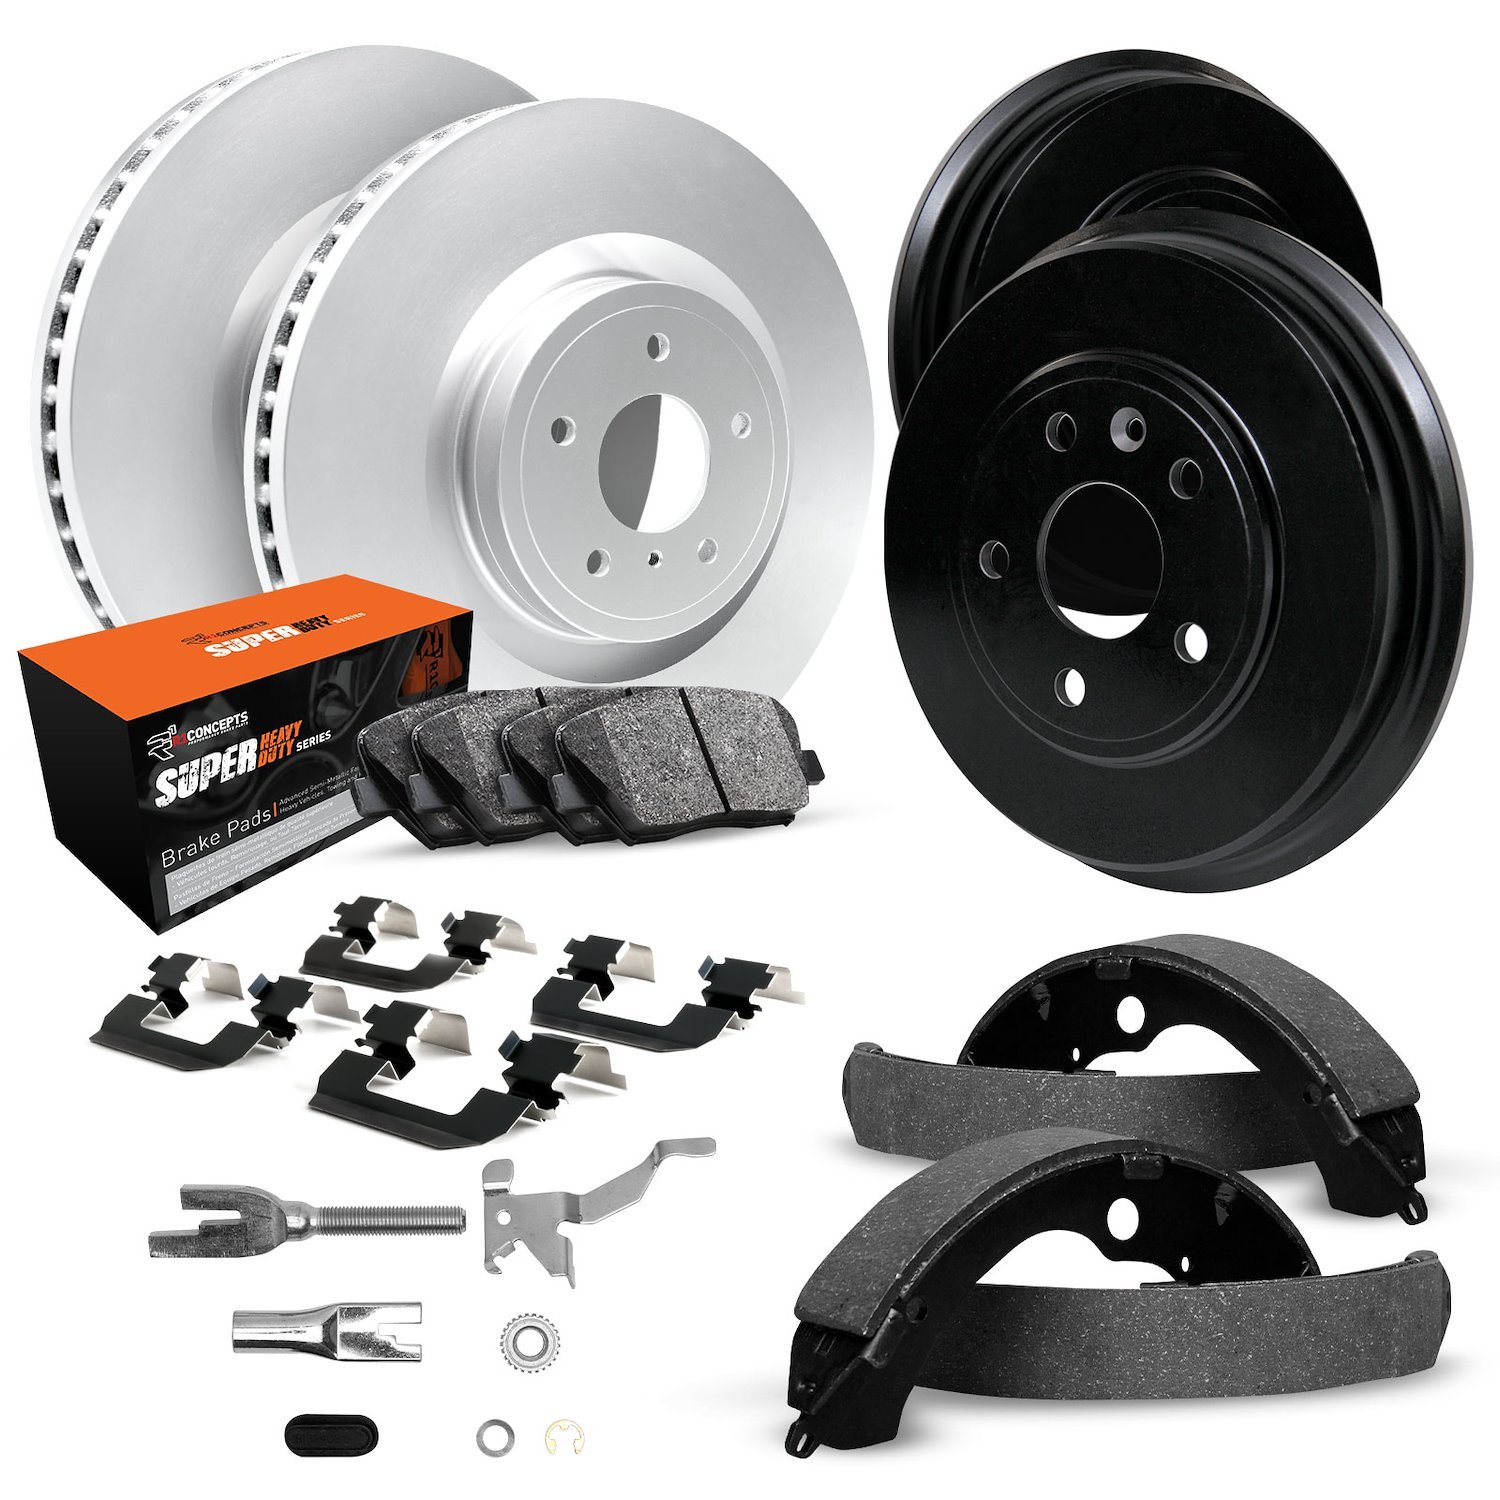 GEO-Carbon Brake Rotor & Drum Set w/Super-Duty Pads, Shoes, Hardware/Adjusters, 2000-2004 Ford/Lincoln/Mercury/Mazda